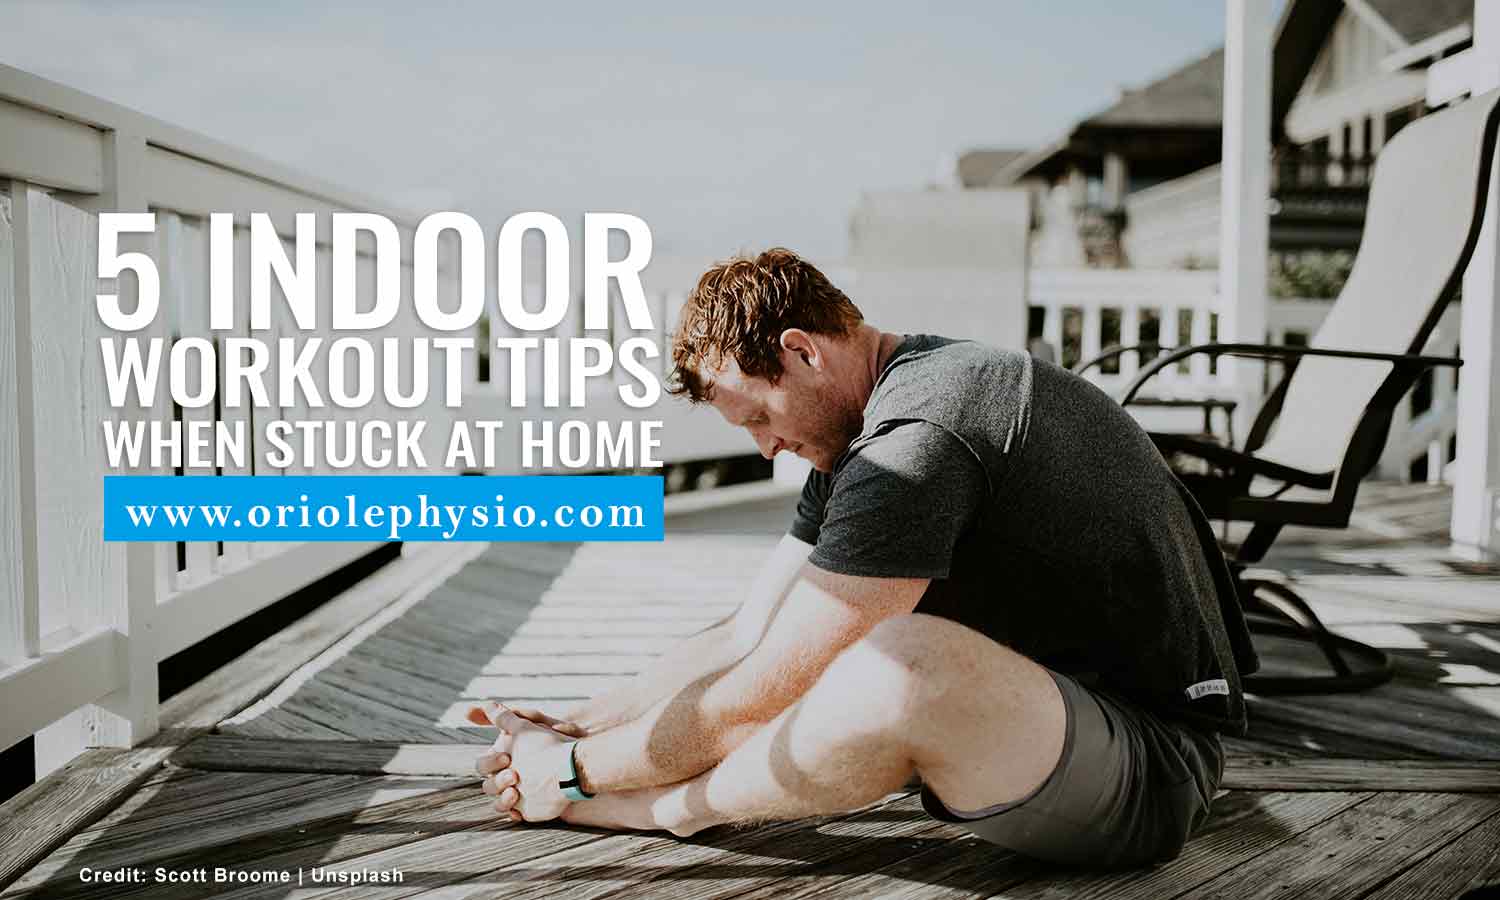 5 Indoor Workout Tips When Stuck at Home